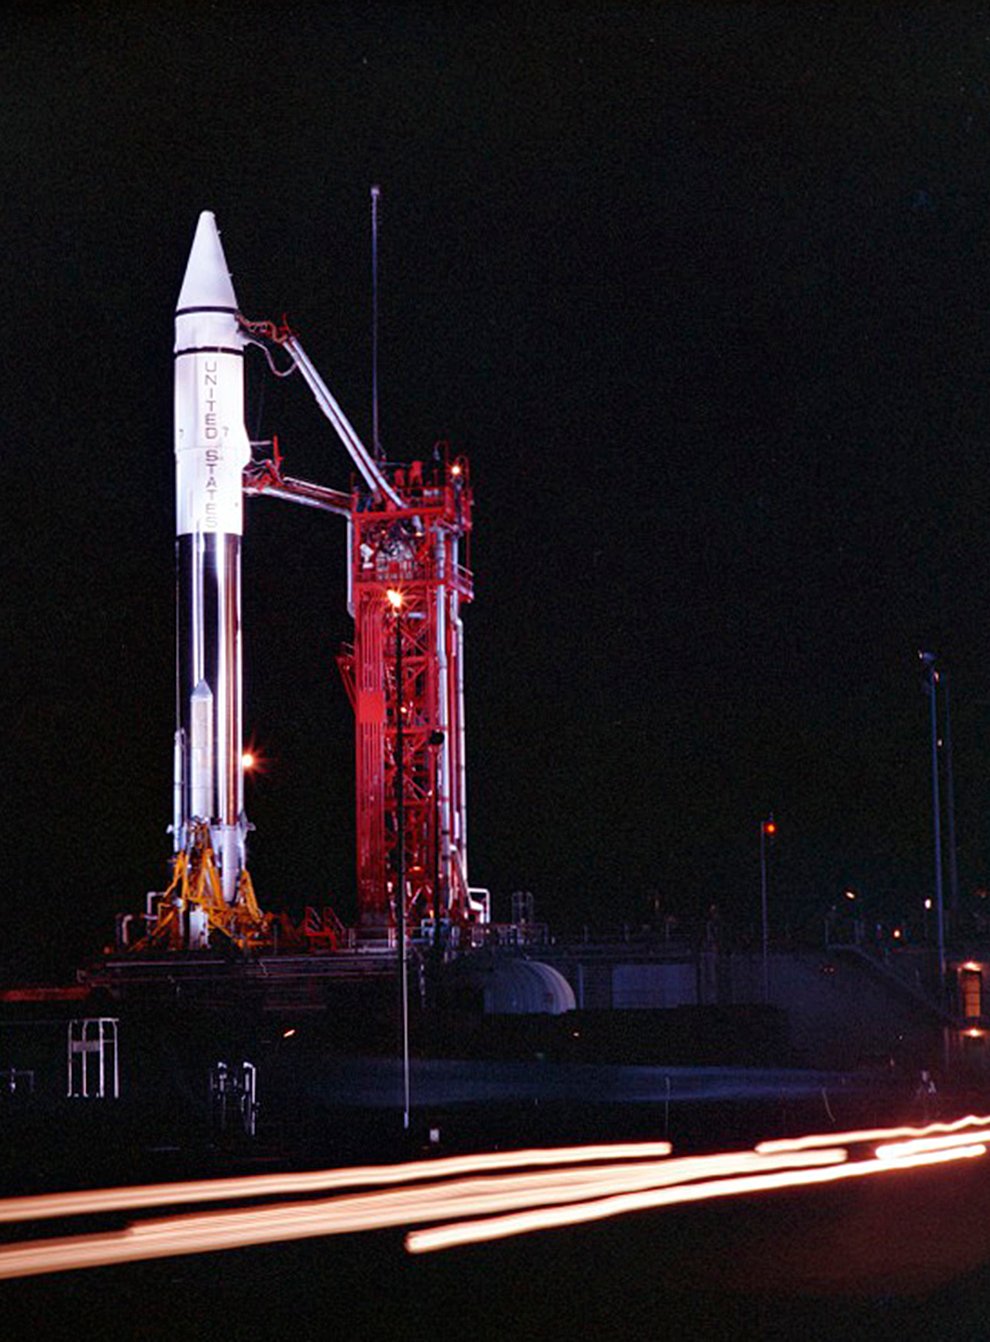 An Atlas Centaur 7 rocket on the launchpad at Cape Canaveral